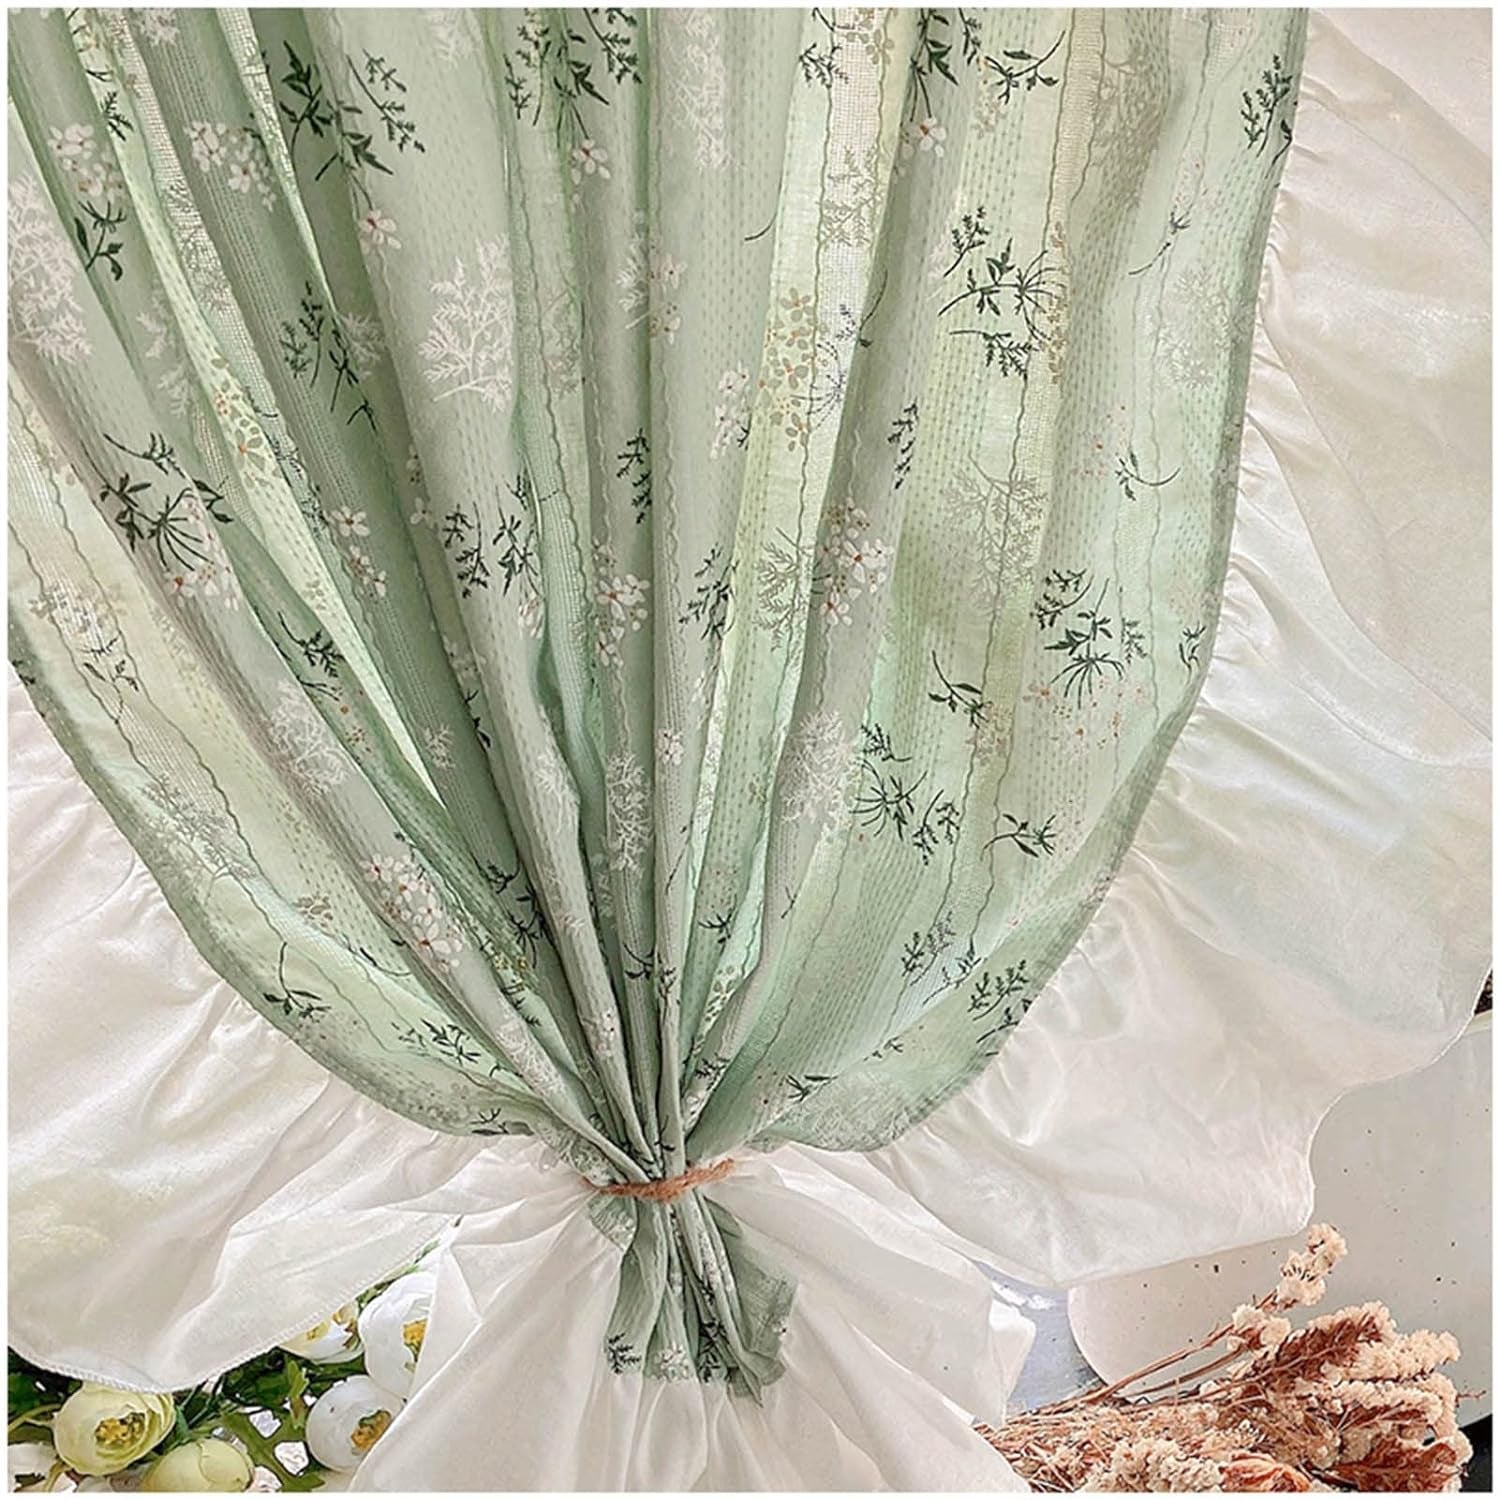 Ruffled Roman Curtains, Cafe Curtains for Bedroom, Living Room, Bistro, Modern Nordic Rod Pocket Leaf Pattern Drapery, Green (Size : Wxh 170X180Cm/67X71In)  HERHOME US Wxh 170X270Cm/67X106In  